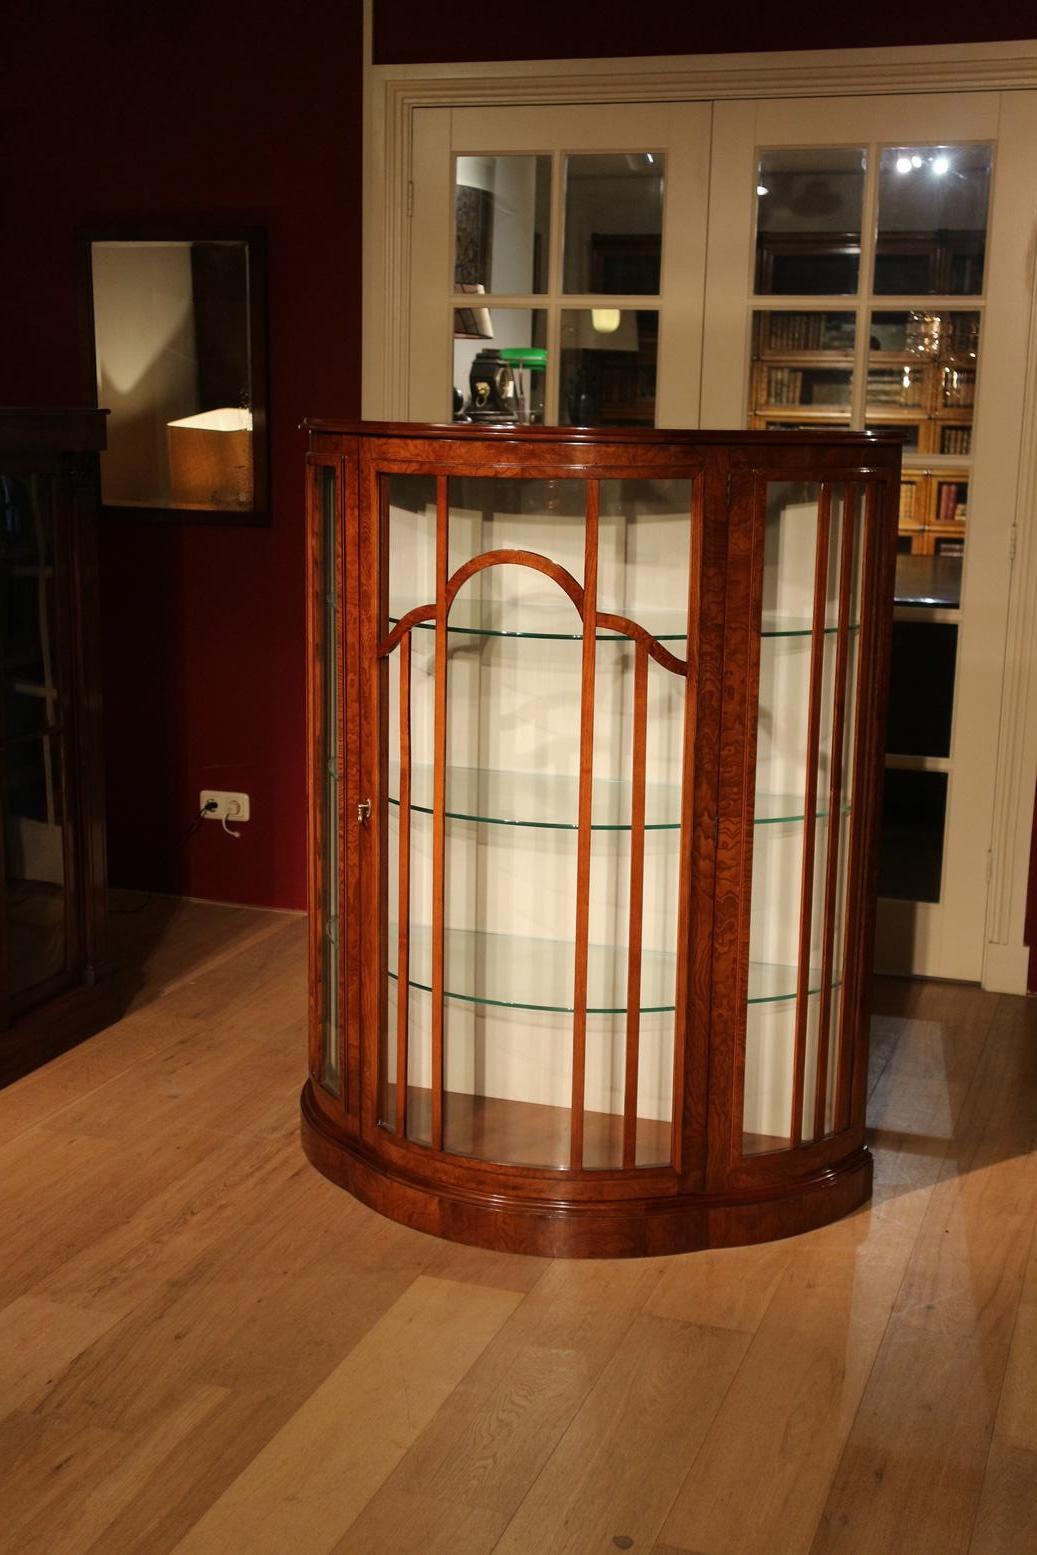 Display cabinet in Art Deco style made of elm wood. In very good condition. With 3 glass shelves.
Origin: The Netherlands
Period: Late 20th century
Size: 113 cm x 45 cm x H 140cm.